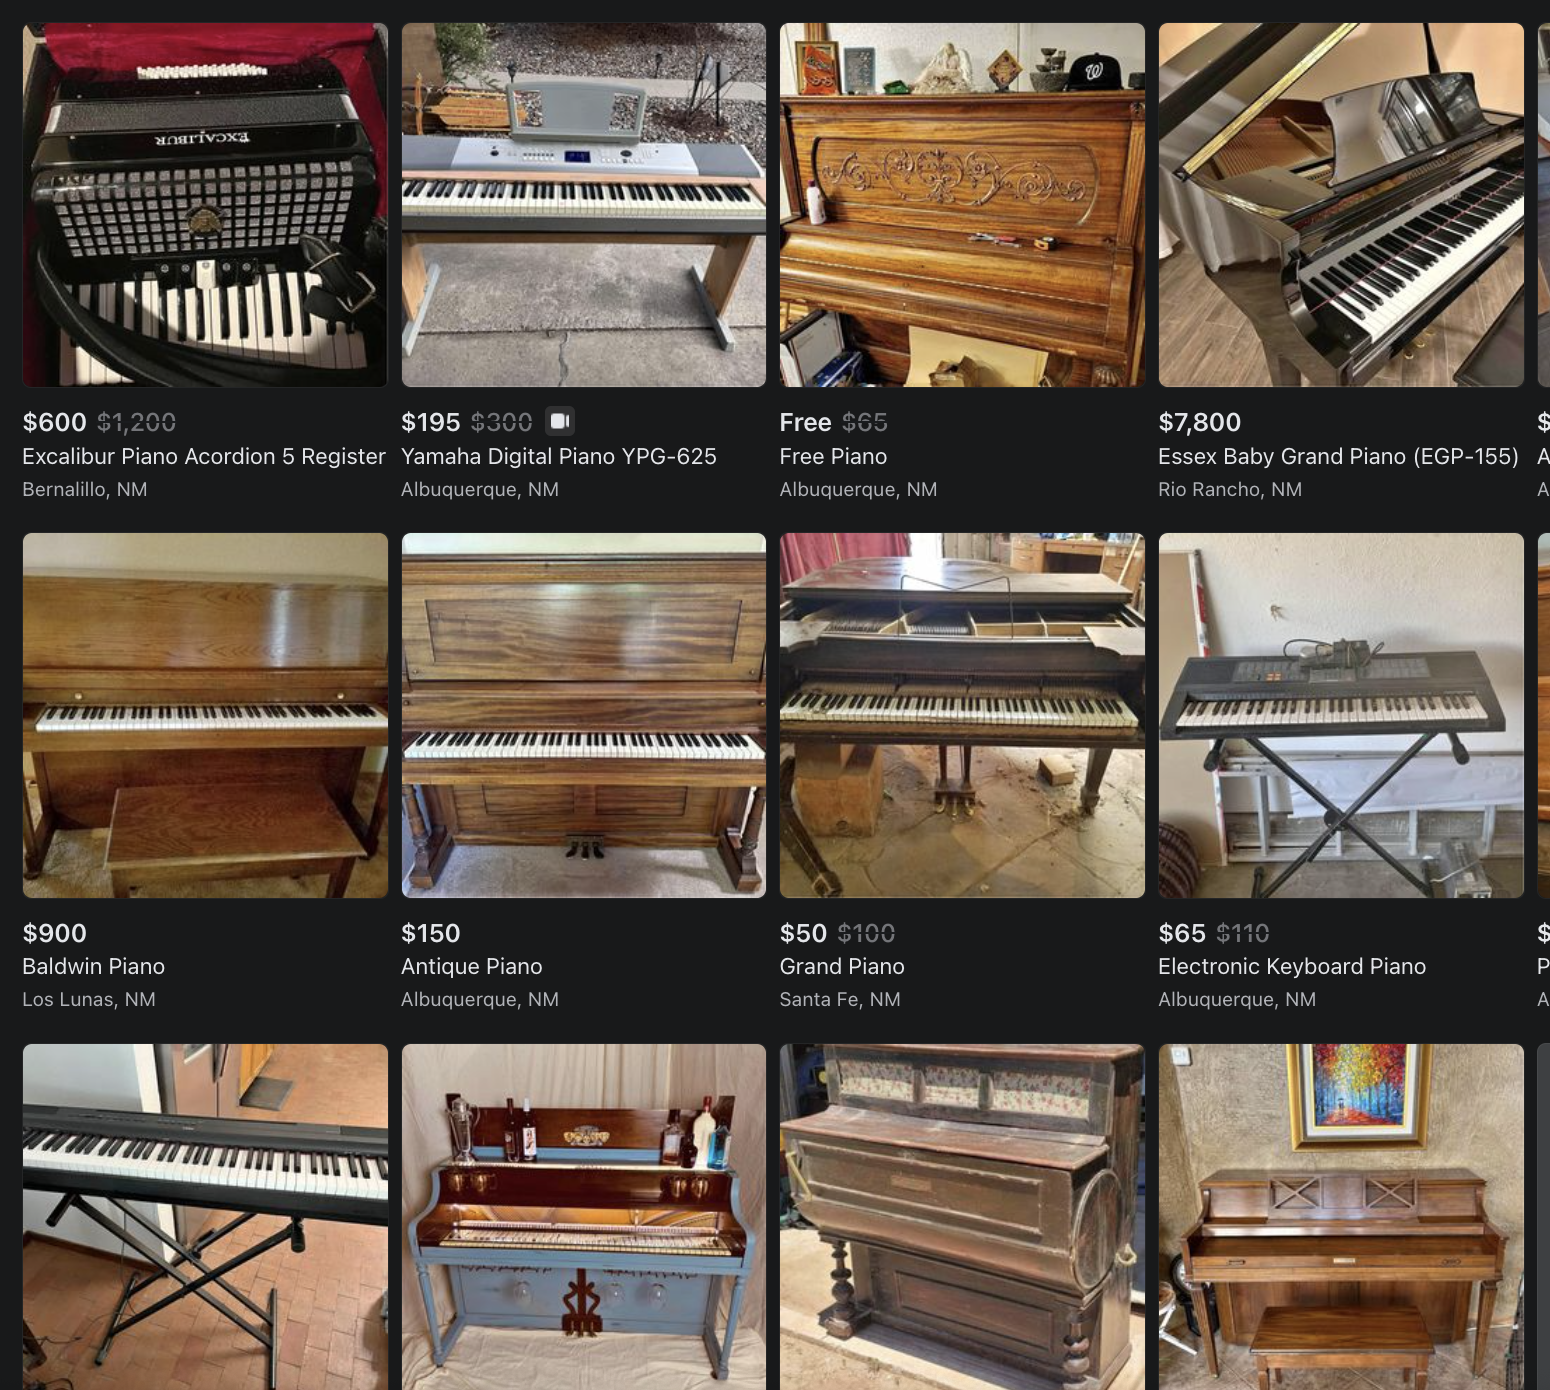 A checklist of things to be aware of, or look out for, when buying a used piano